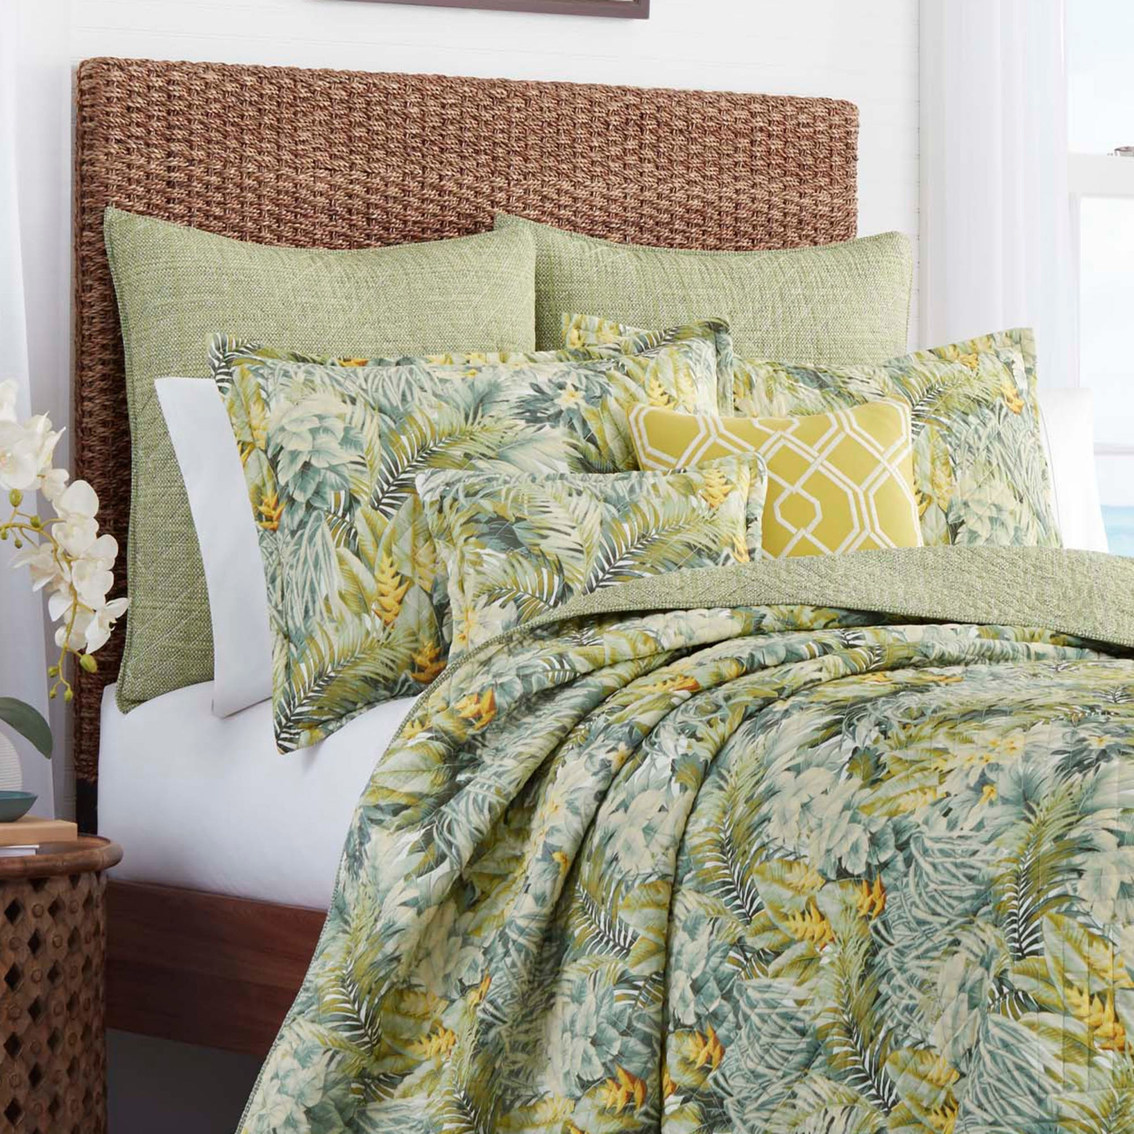 Tommy Bahama Cuba Cabana Green Full/queen Quilt, Comforters & Quilts, Household